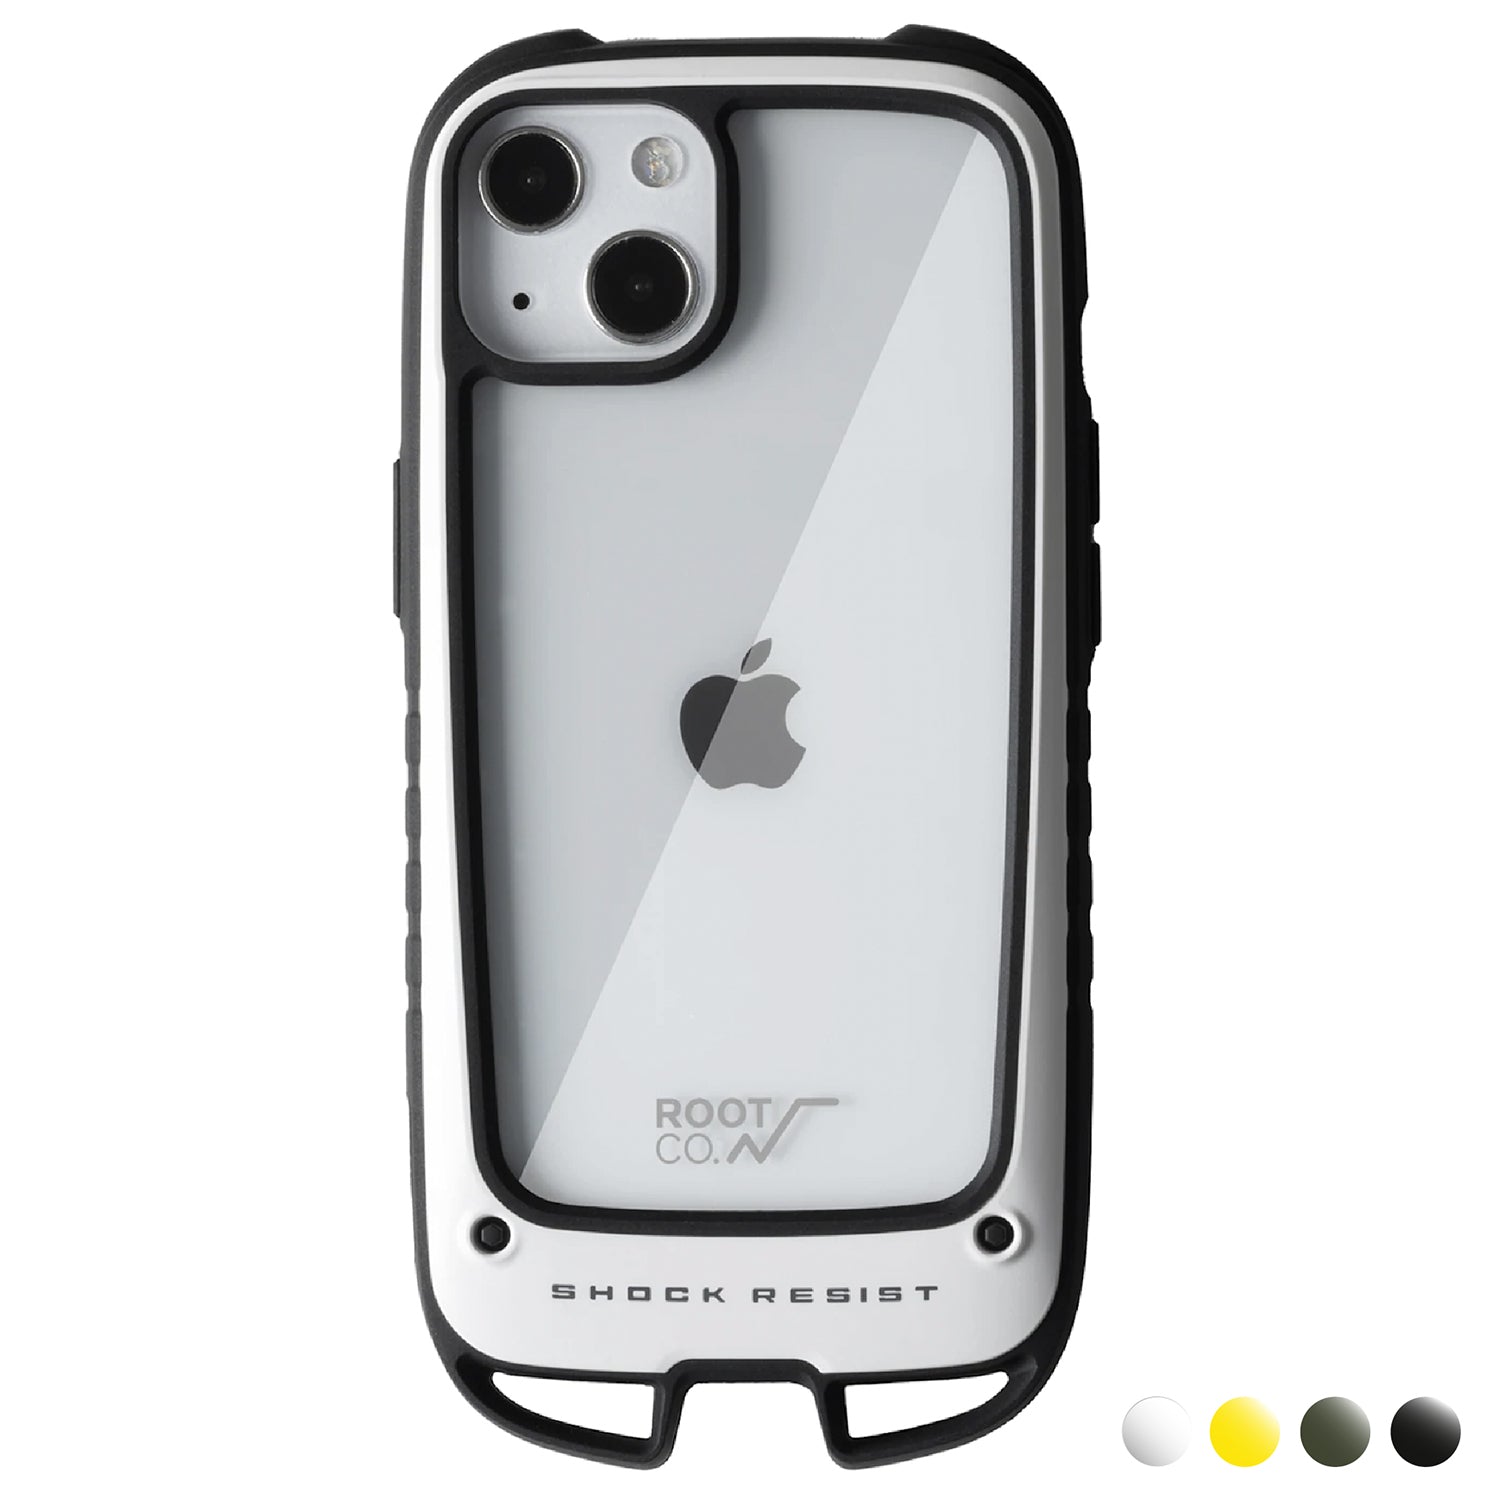 ROOT CO. Gravity Shock Resist Case + Hold for iPhone 13 6.1"(2021) Default ROOT CO. 